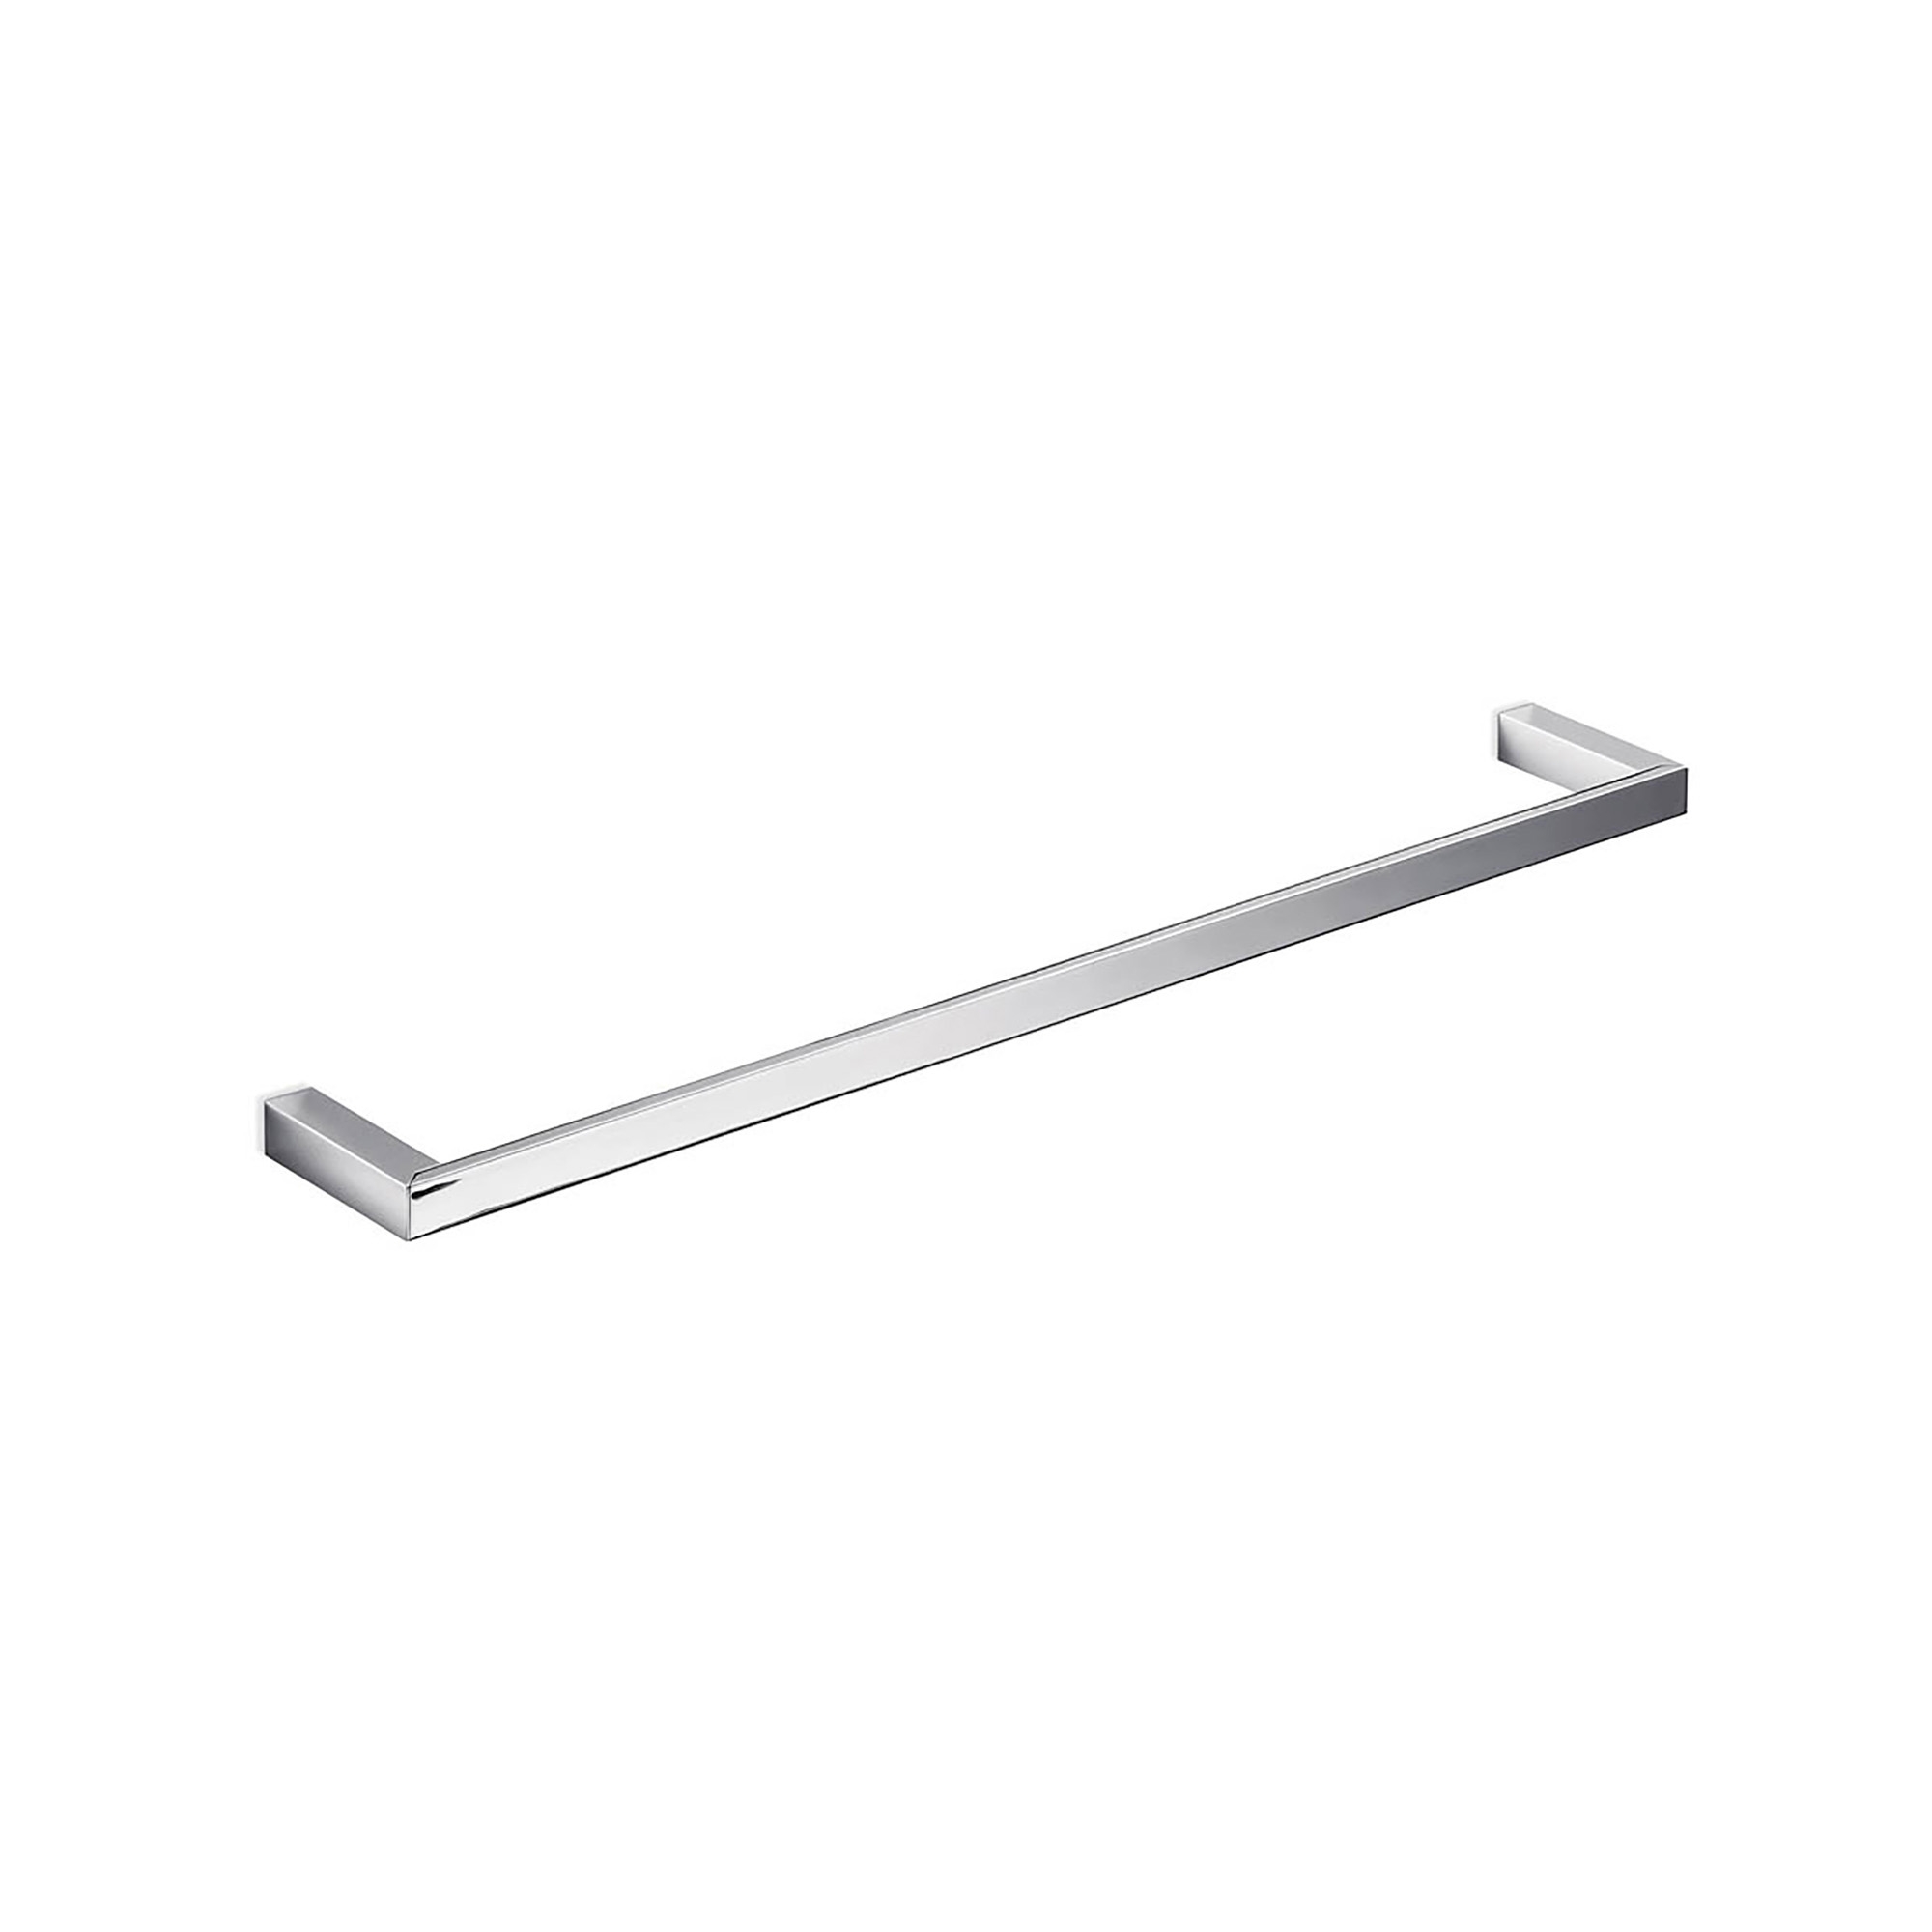 Divo A1518D Towel Bar in Polished Chrome